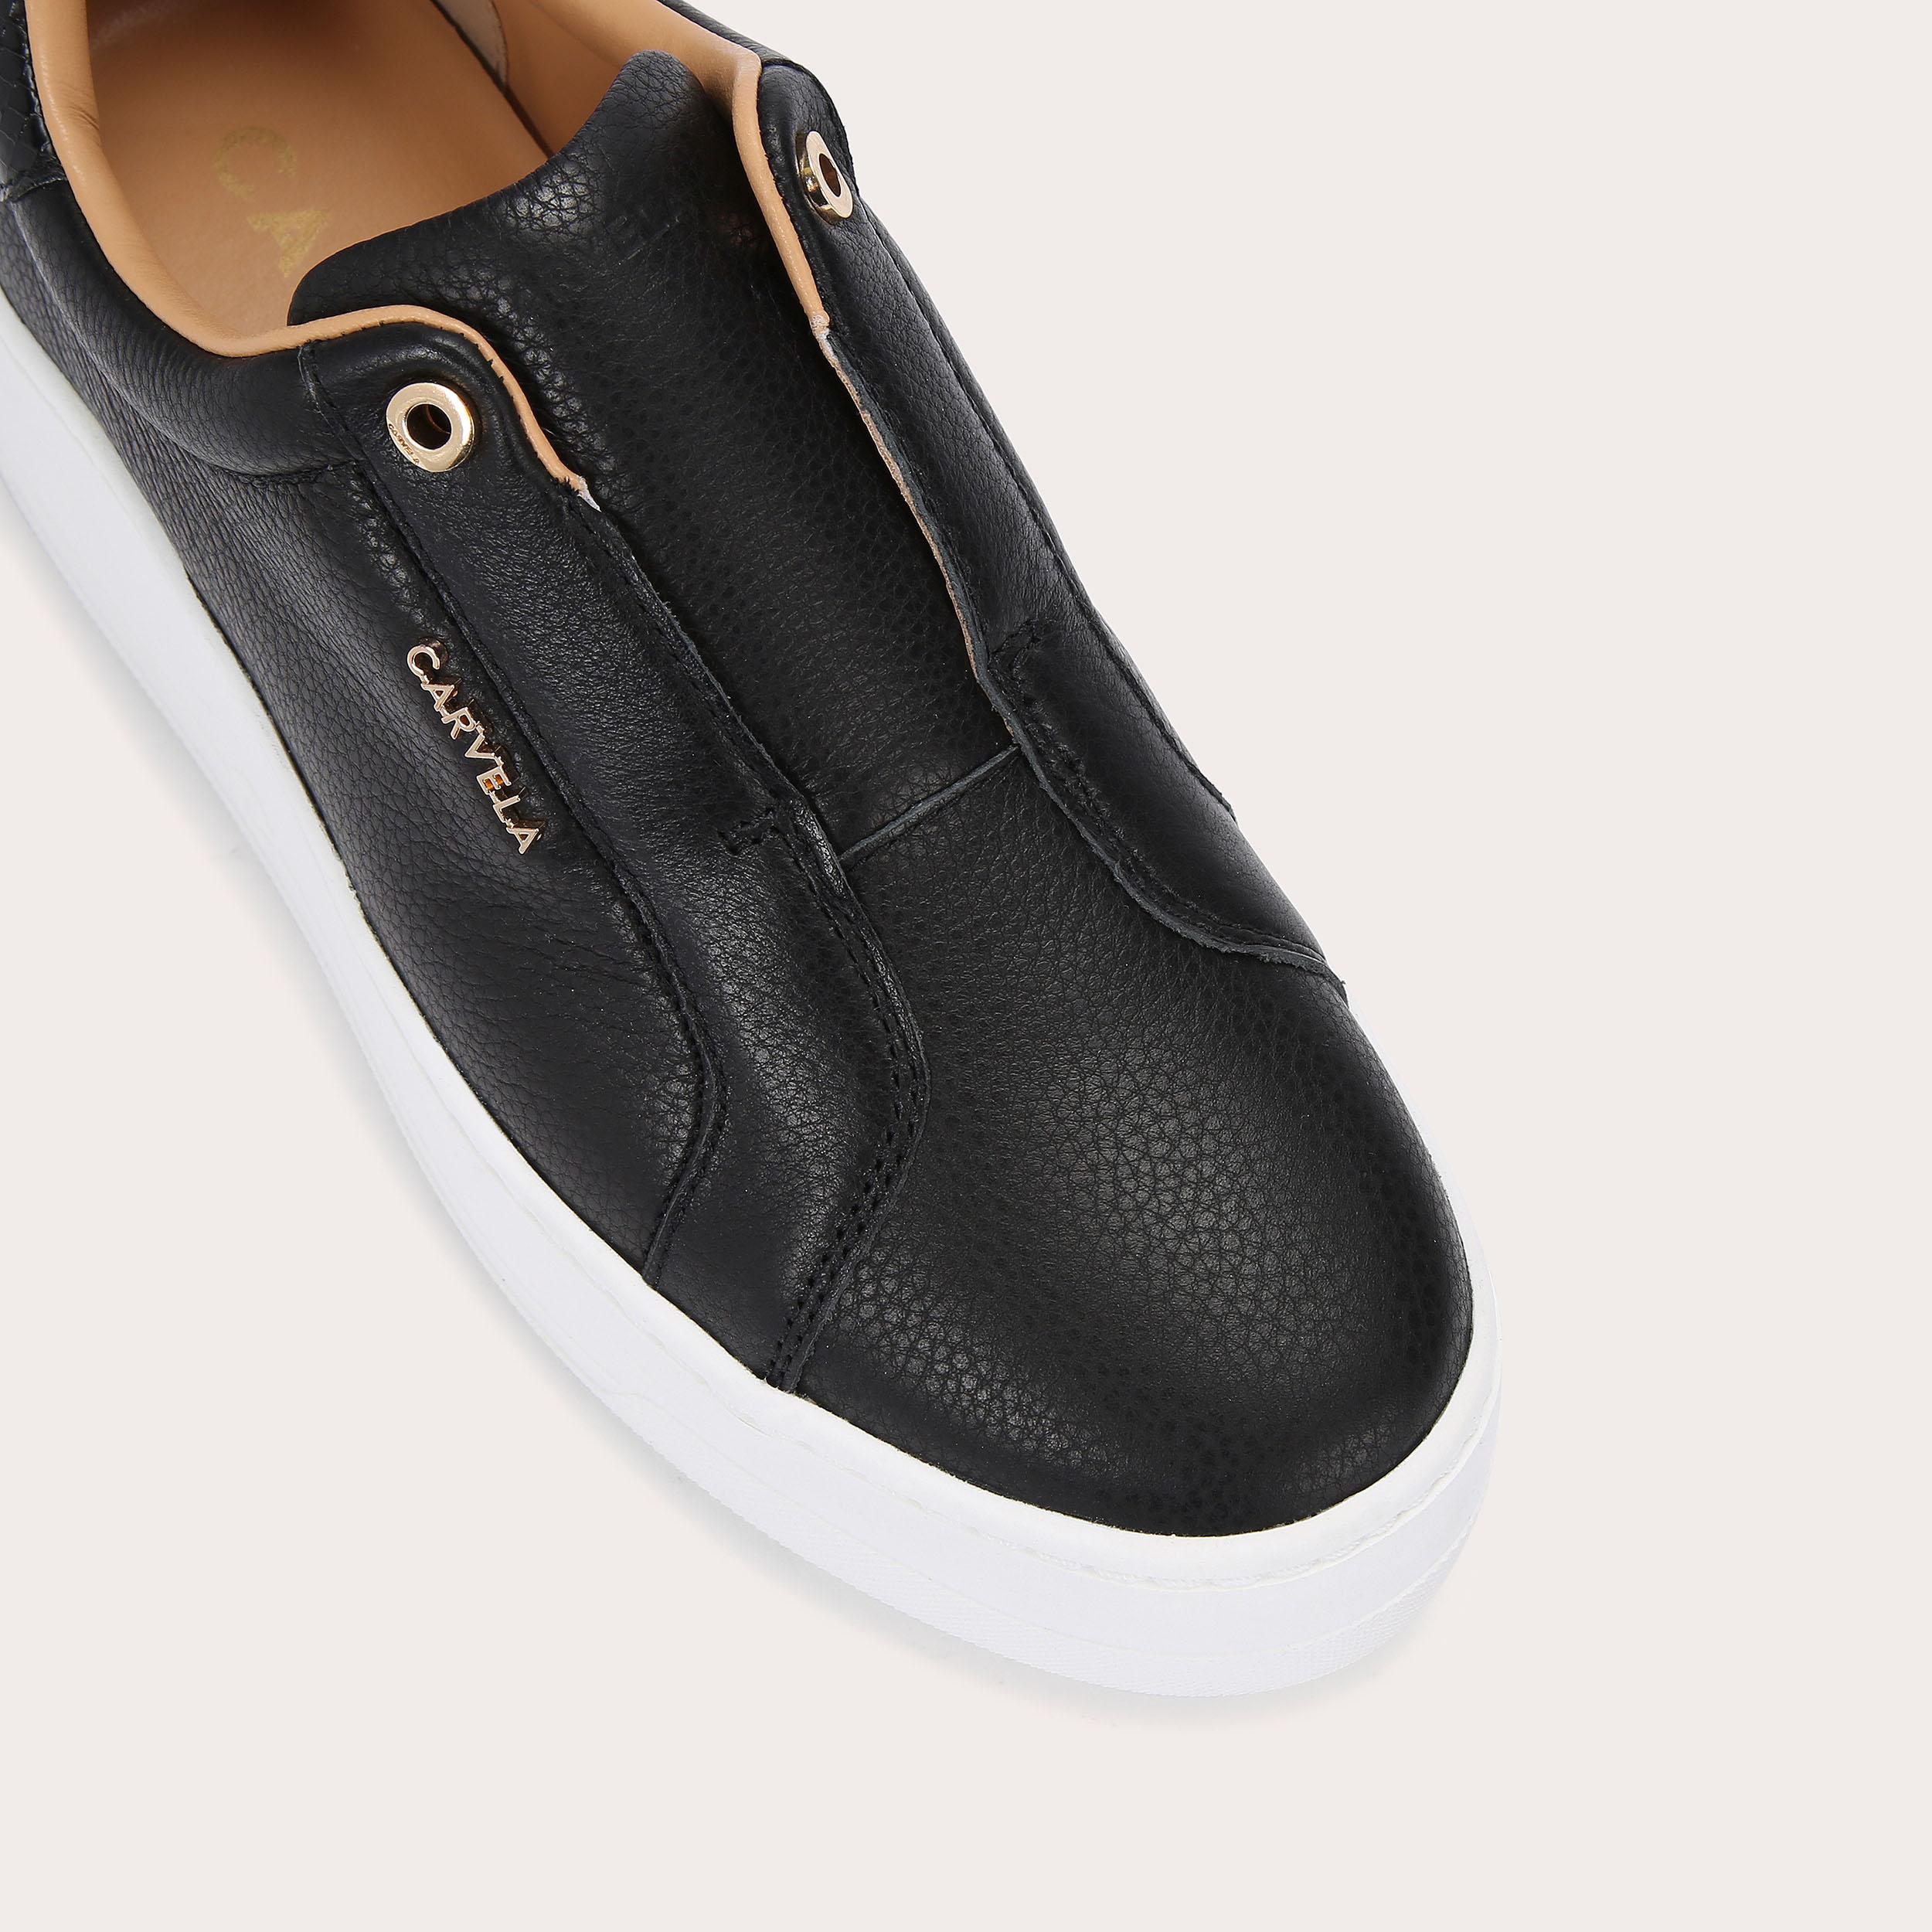 CONNECTED LACELESS Black Leather Trainers by CARVELA